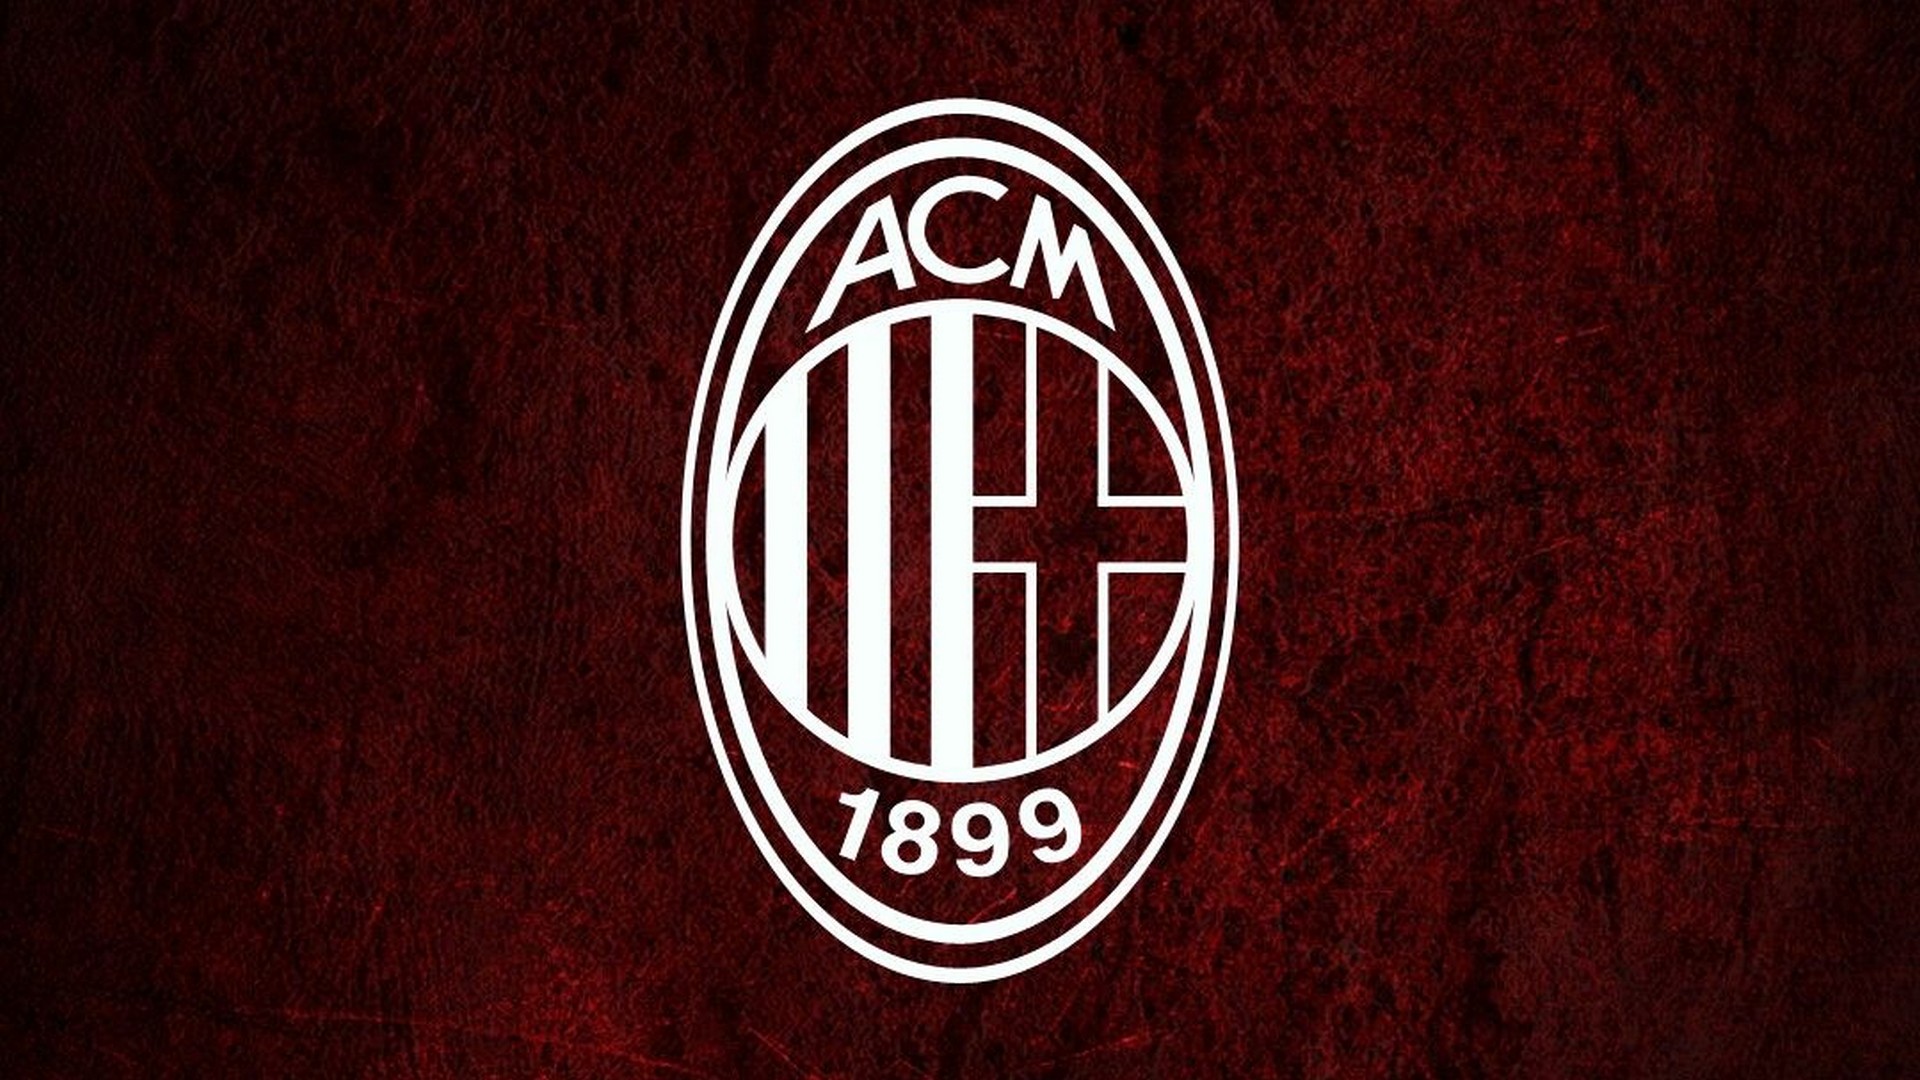 AC Milan Backgrounds HD With high-resolution 1920X1080 pixel. You can use this wallpaper for your Desktop Computers, Mac Screensavers, Windows Backgrounds, iPhone Wallpapers, Tablet or Android Lock screen and another Mobile device